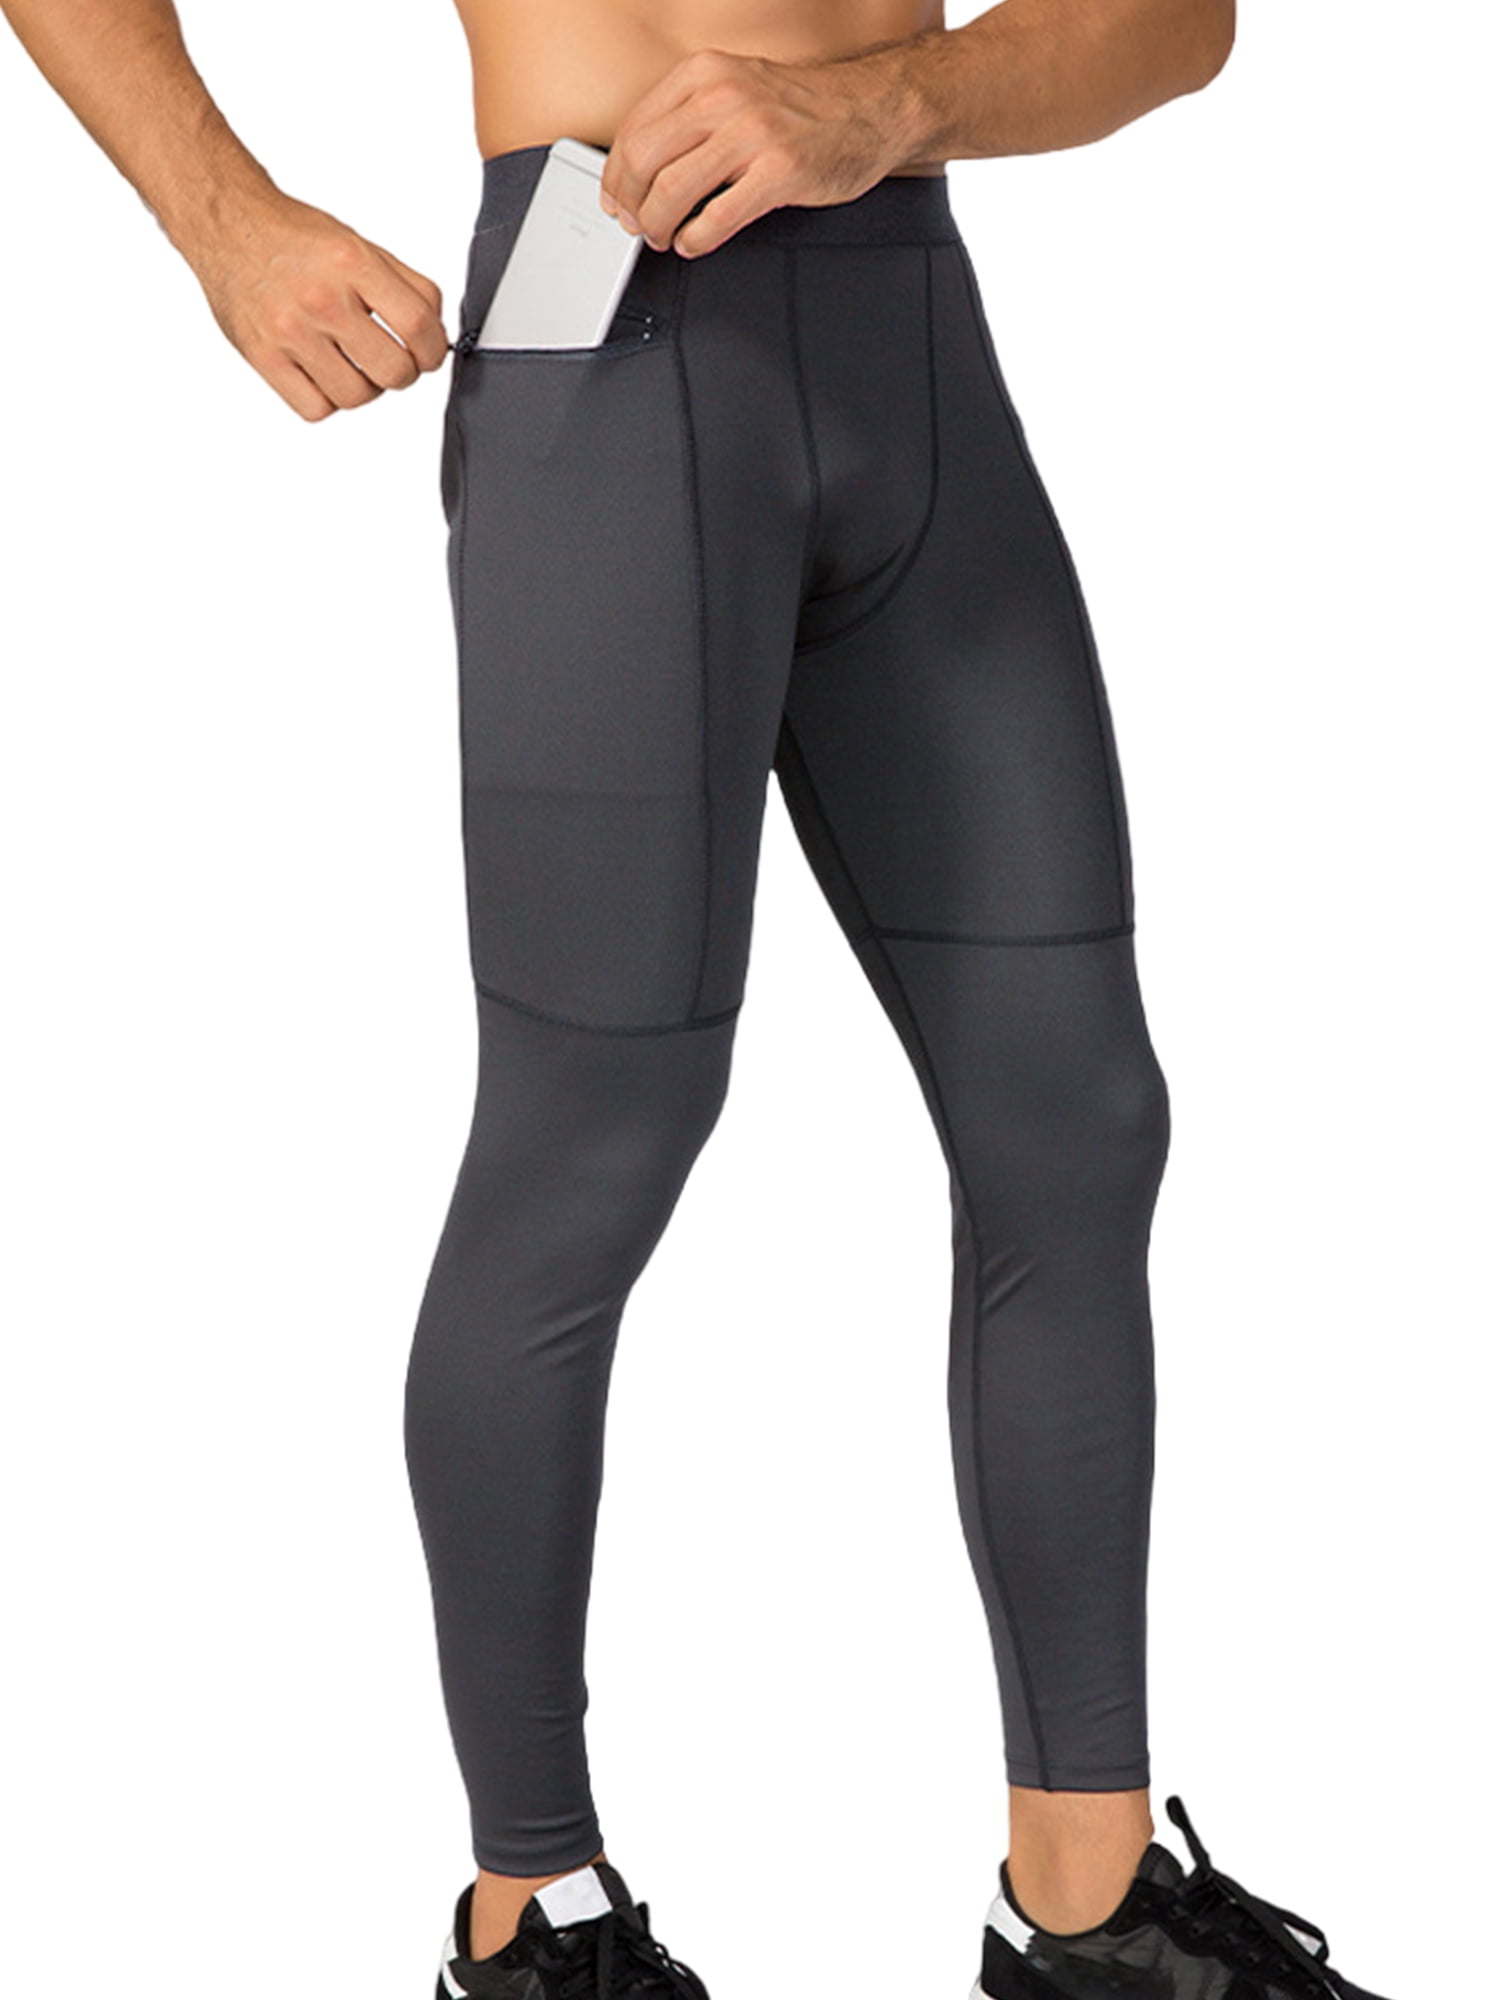 HOPLYNN Men's Leggings Sports Compression Pants Quick Dry Base Layer Bottom  Comfortable and Robust Gym Leggings Lightweight and Elastic Tights Thermal  Underwear Black L - ShopStyle Activewear Trousers